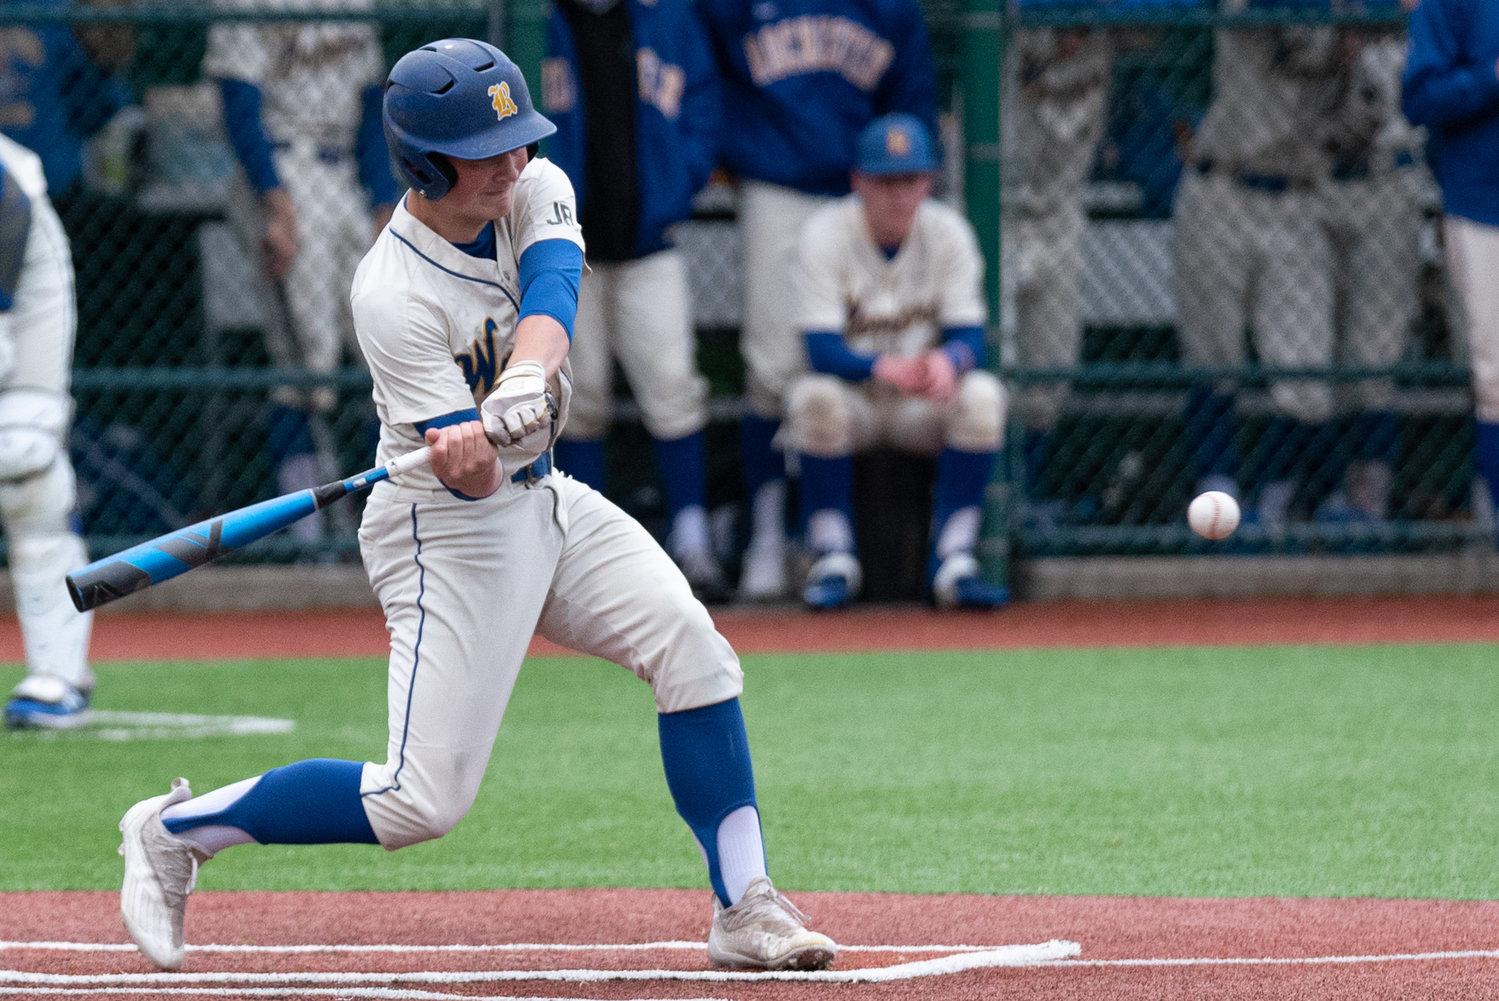 Rochester infielder Garren Smith takes a swing at a pitch against Black Hills in a play-in game at the Regional Athletic Complex in Lacey May 6.